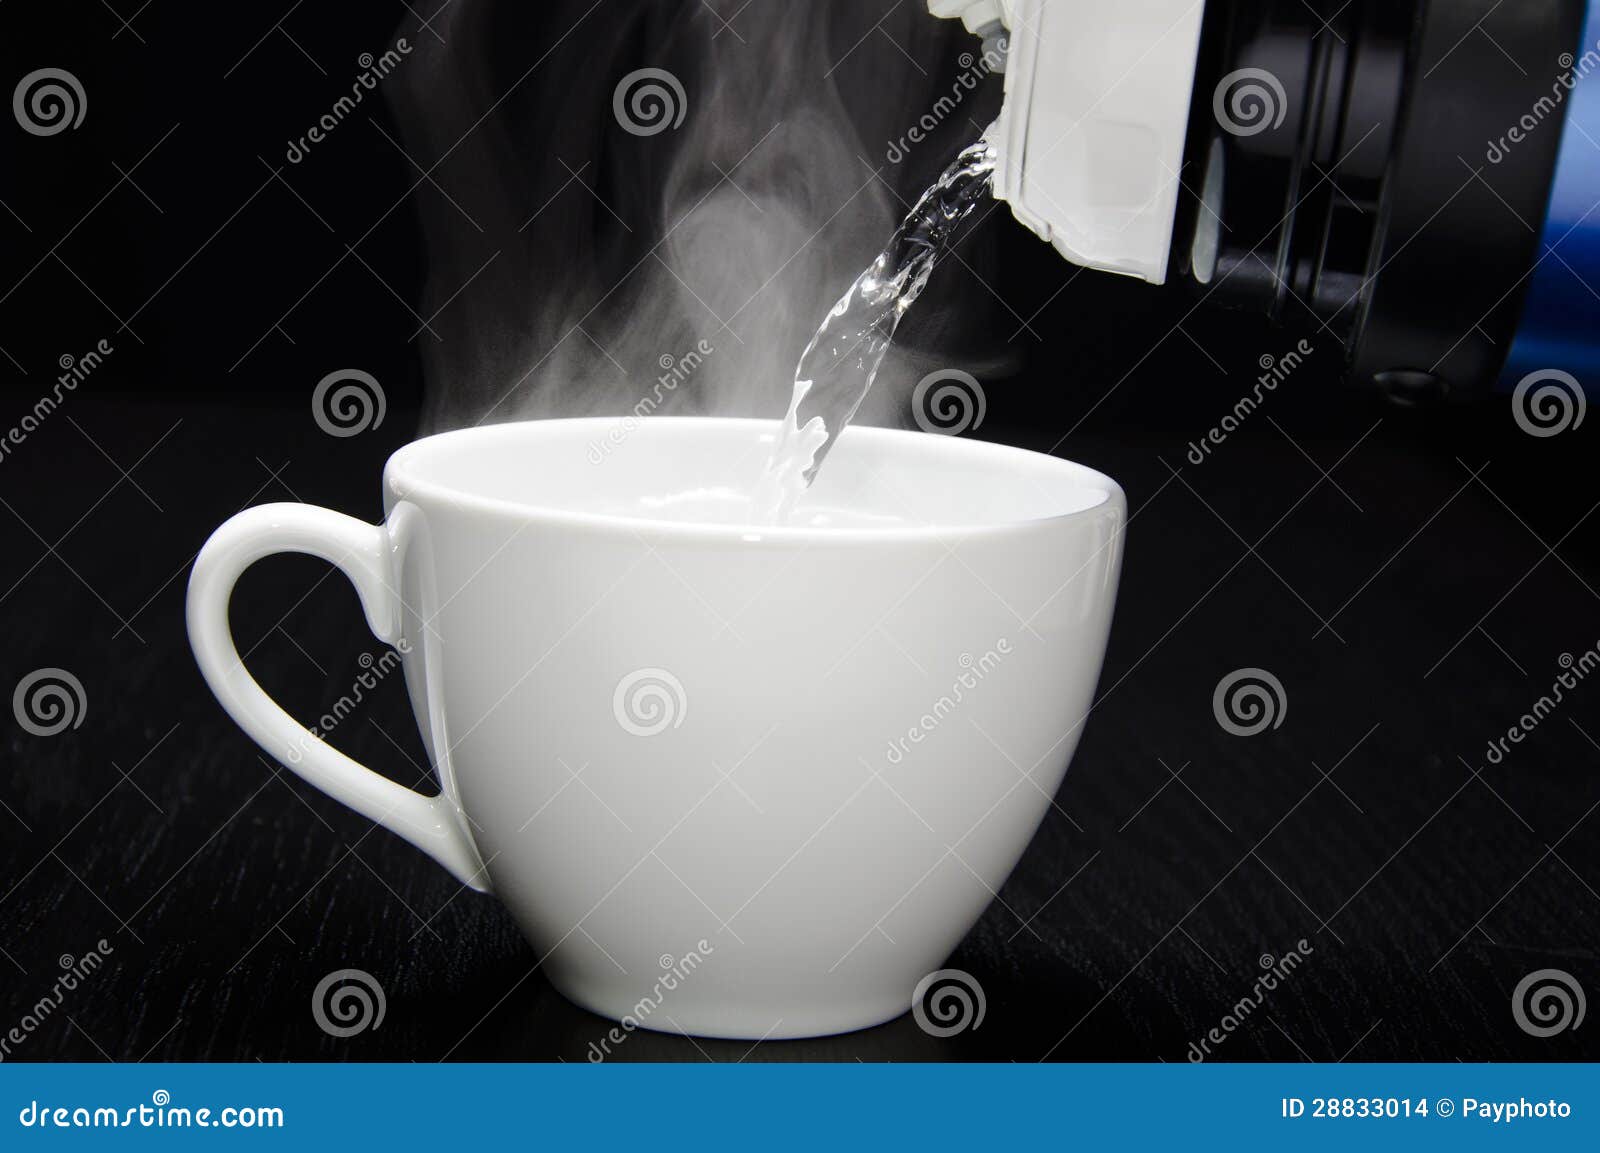 https://thumbs.dreamstime.com/z/pouring-water-your-tea-cup-28833014.jpg